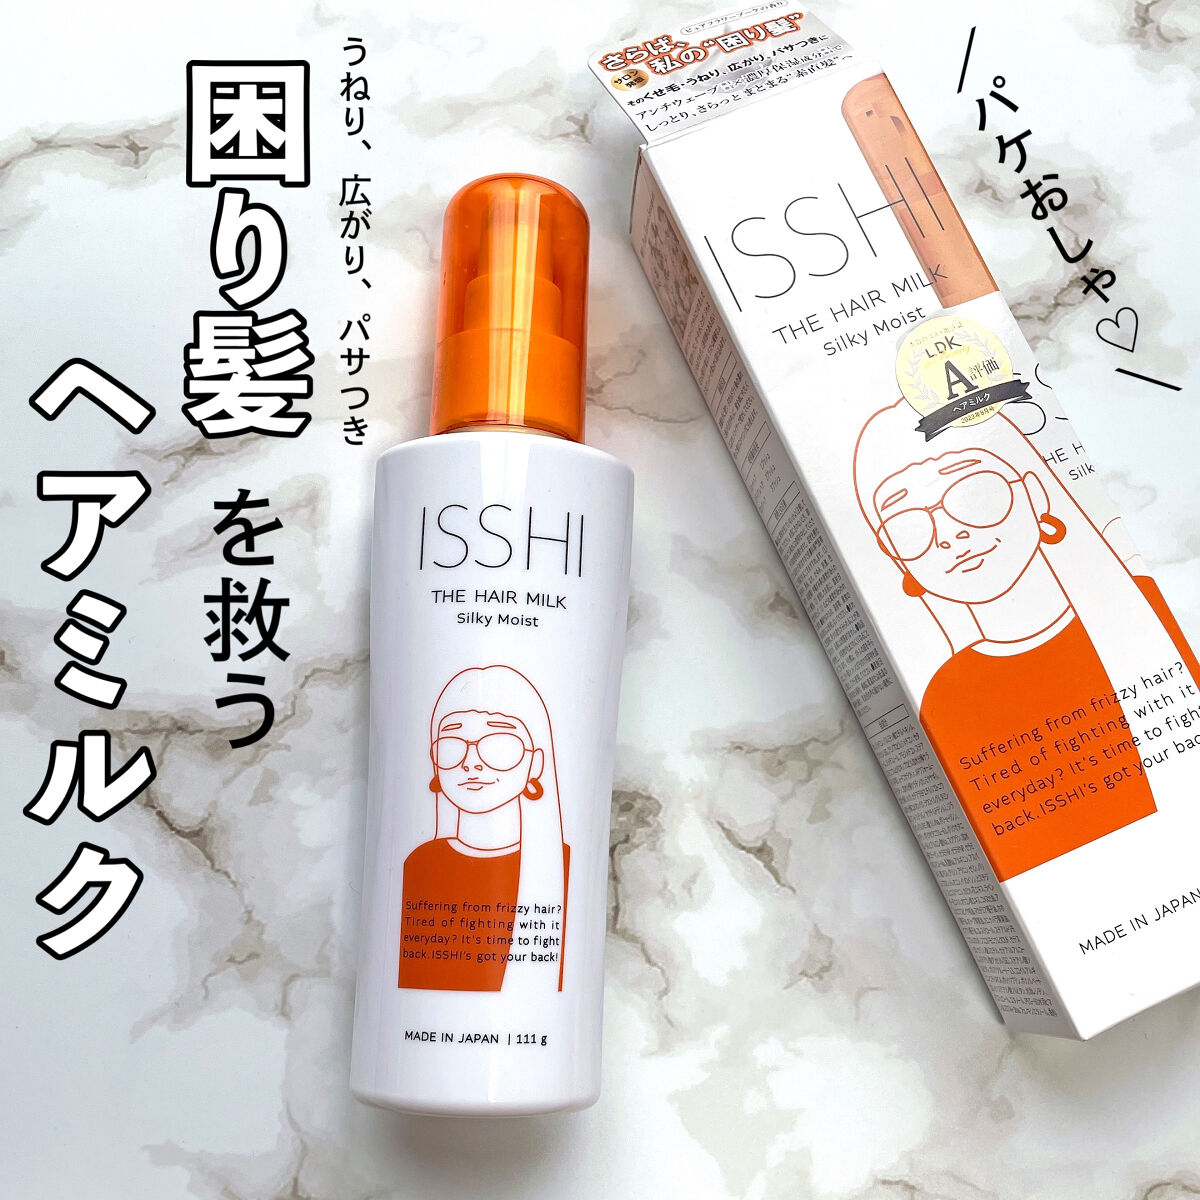 ISSHI THE HAIR MILK Silky Moist ヘアミルク